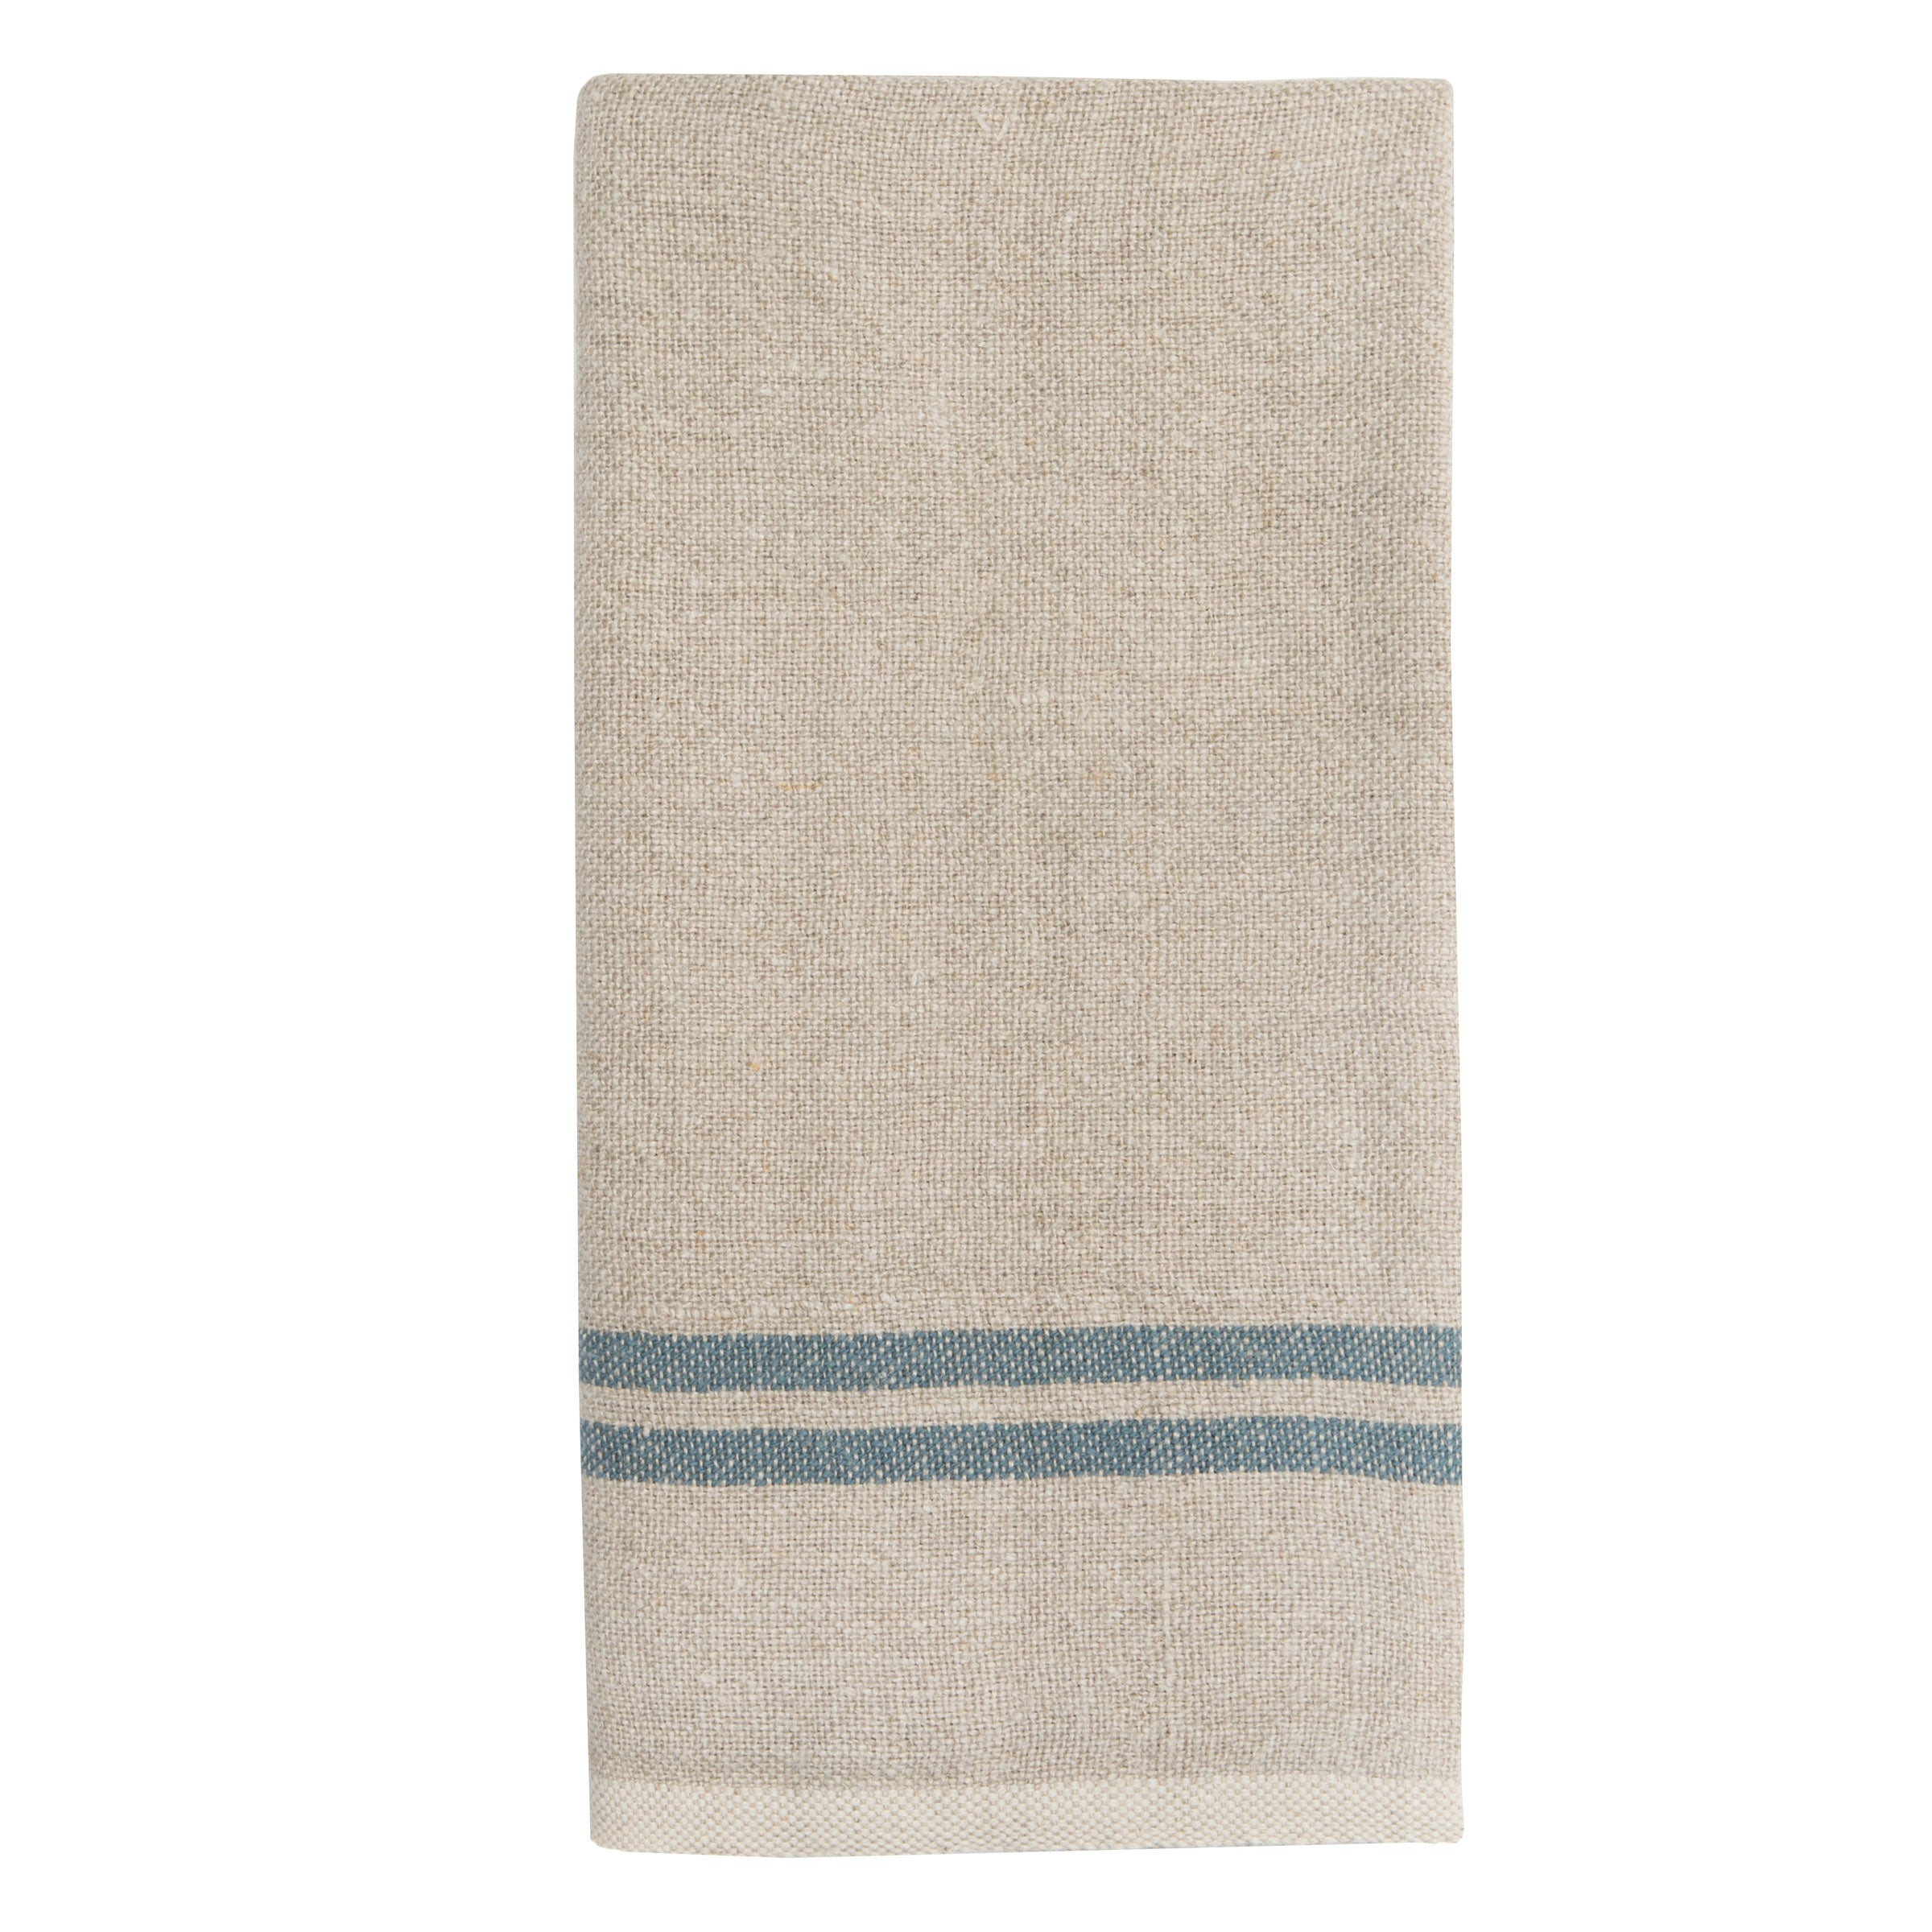 Vintage Linen Kitchen Towel – Driftwood Maui & Home By Driftwood